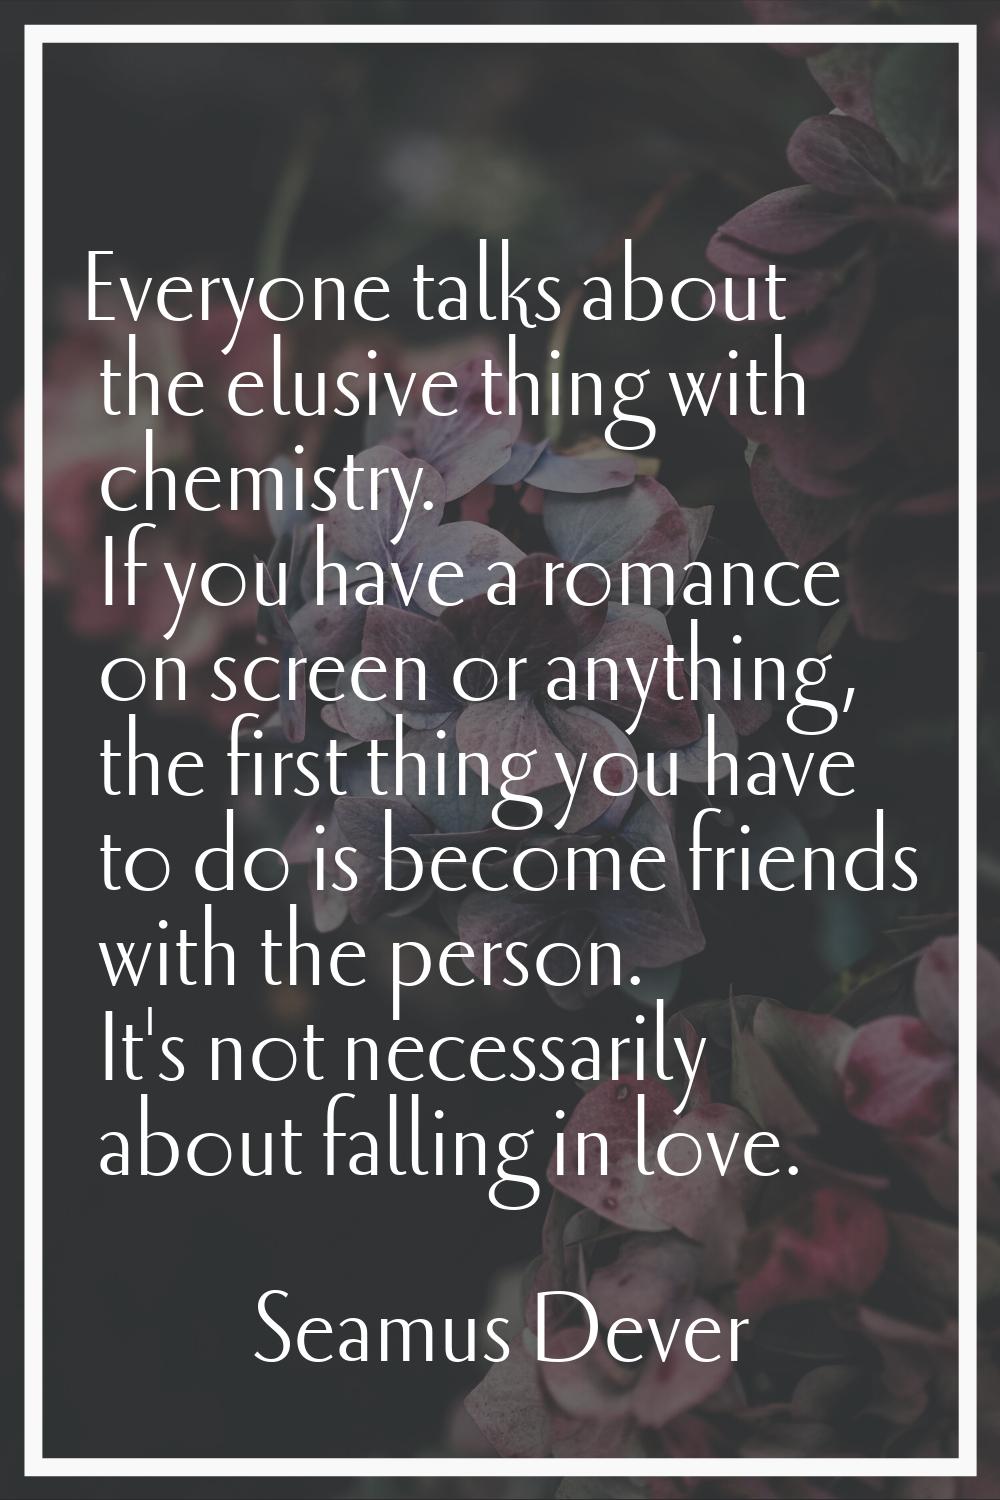 Everyone talks about the elusive thing with chemistry. If you have a romance on screen or anything,